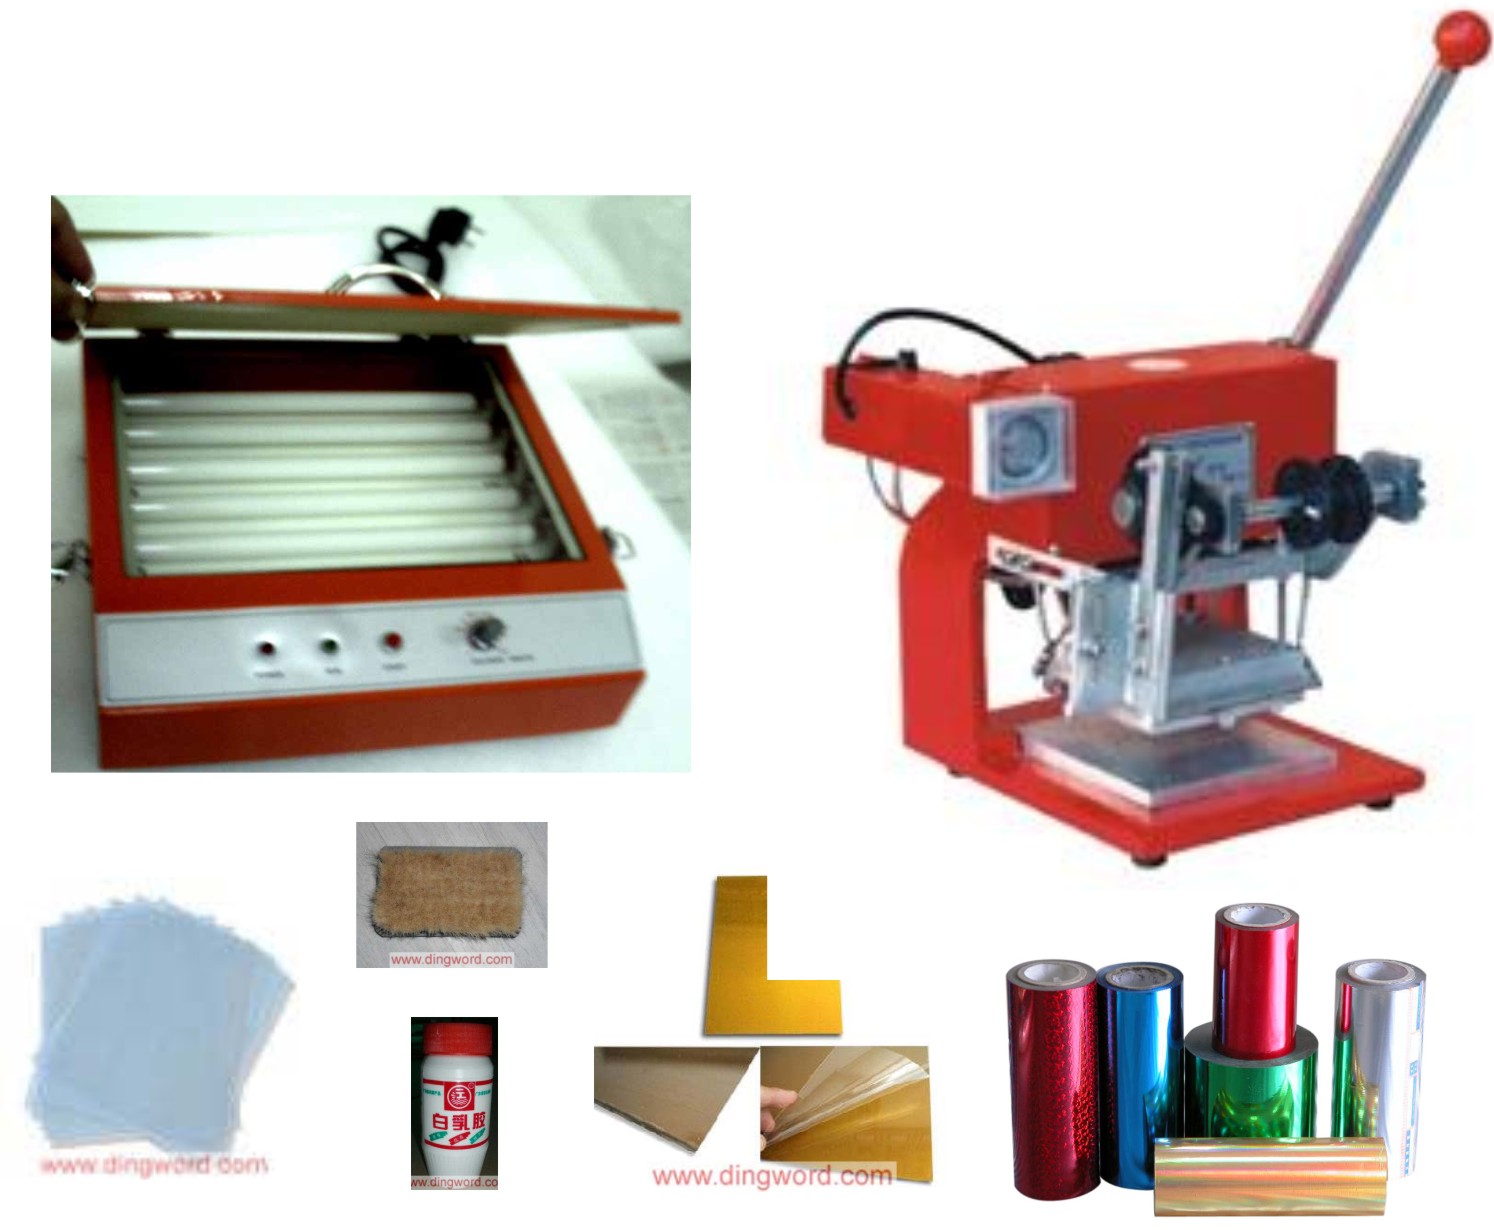 Hot foil stamping machine business start up complete package